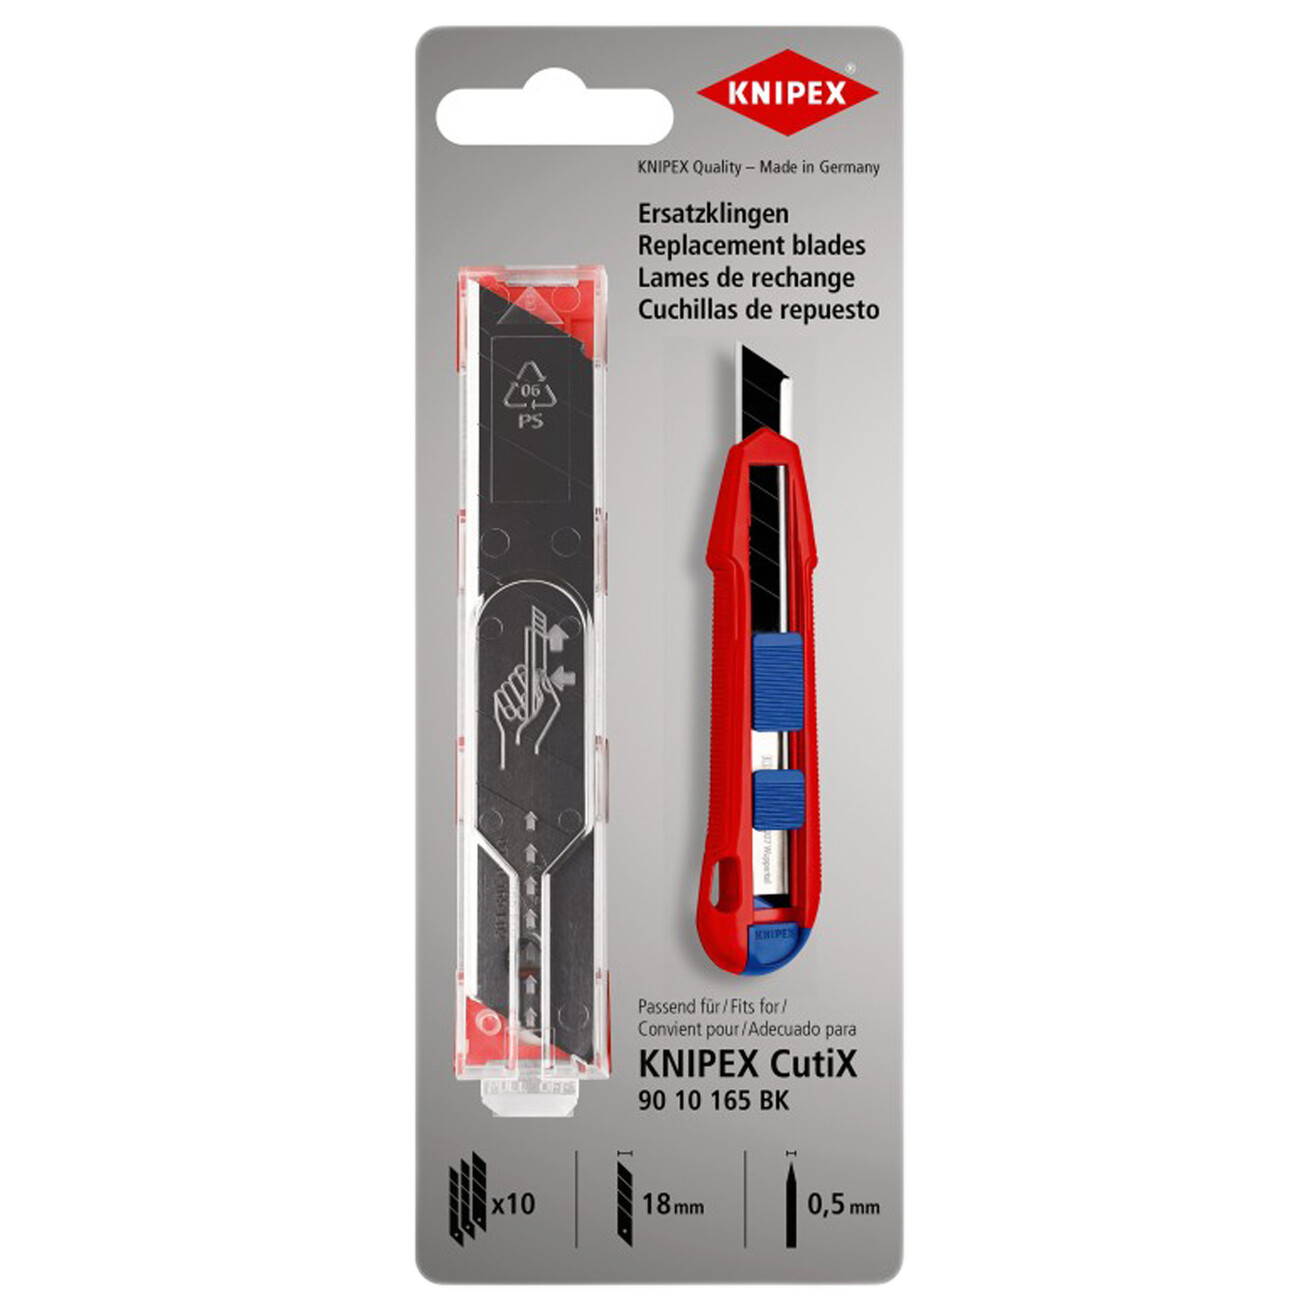 Knipex Replacement Spare Blade For CutiX® 90 10 165 BK 10 Pack 90 10 165 E02